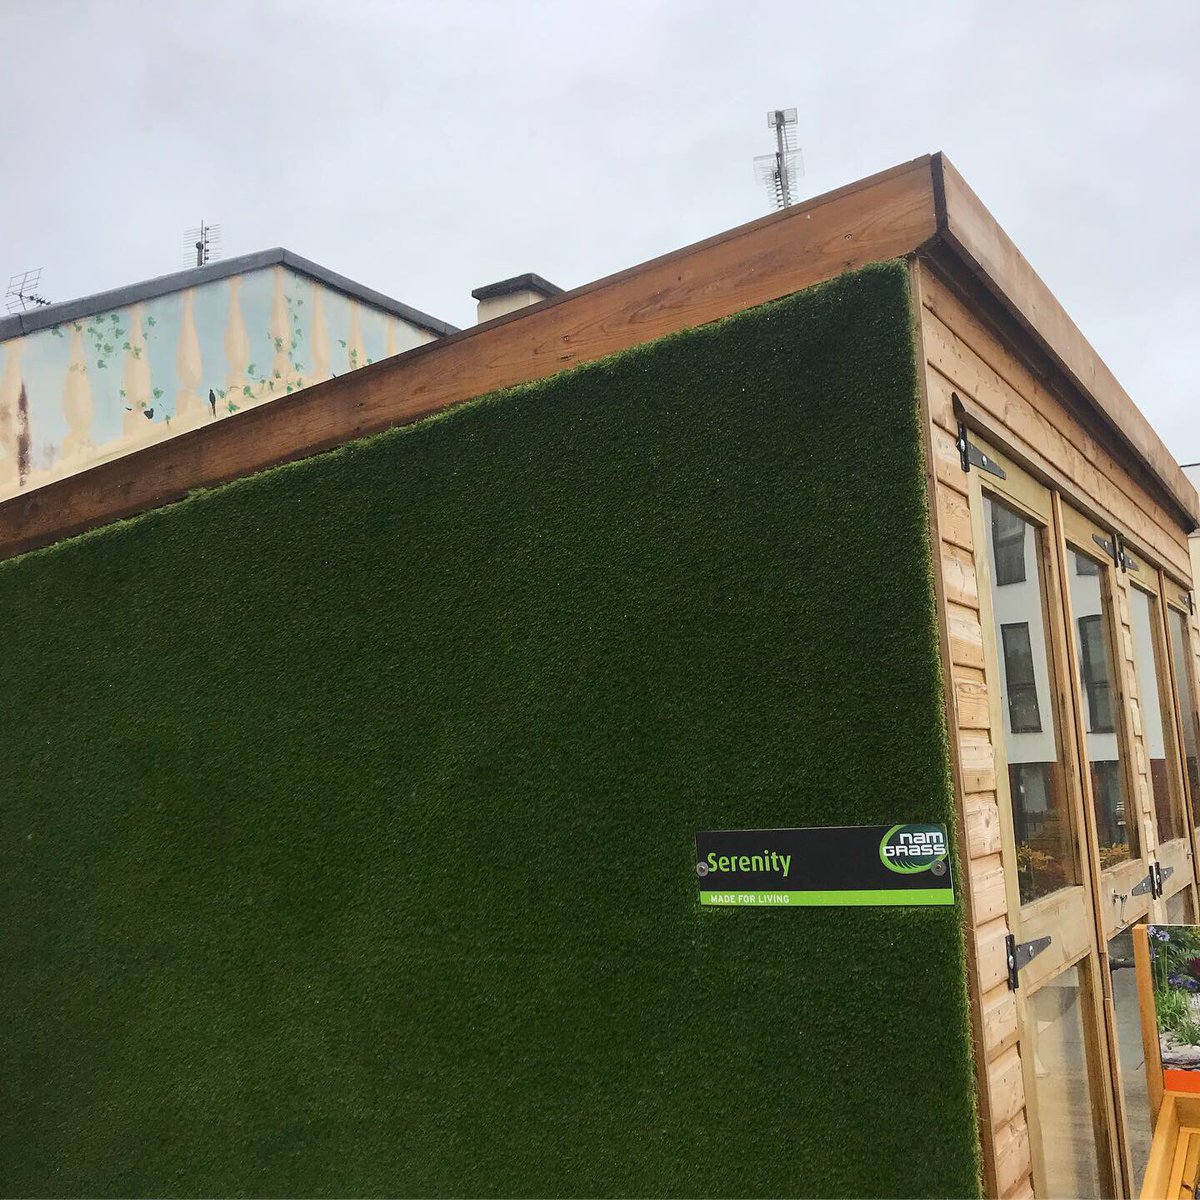 I was up seeing Simon @BENCECheltenham today. New @Namgrass display of #serenity on the side of the landscaping cabin looking 👌🏻👌🏻😍

#madeforliving #artificialgrass #namgrass #jointhestory